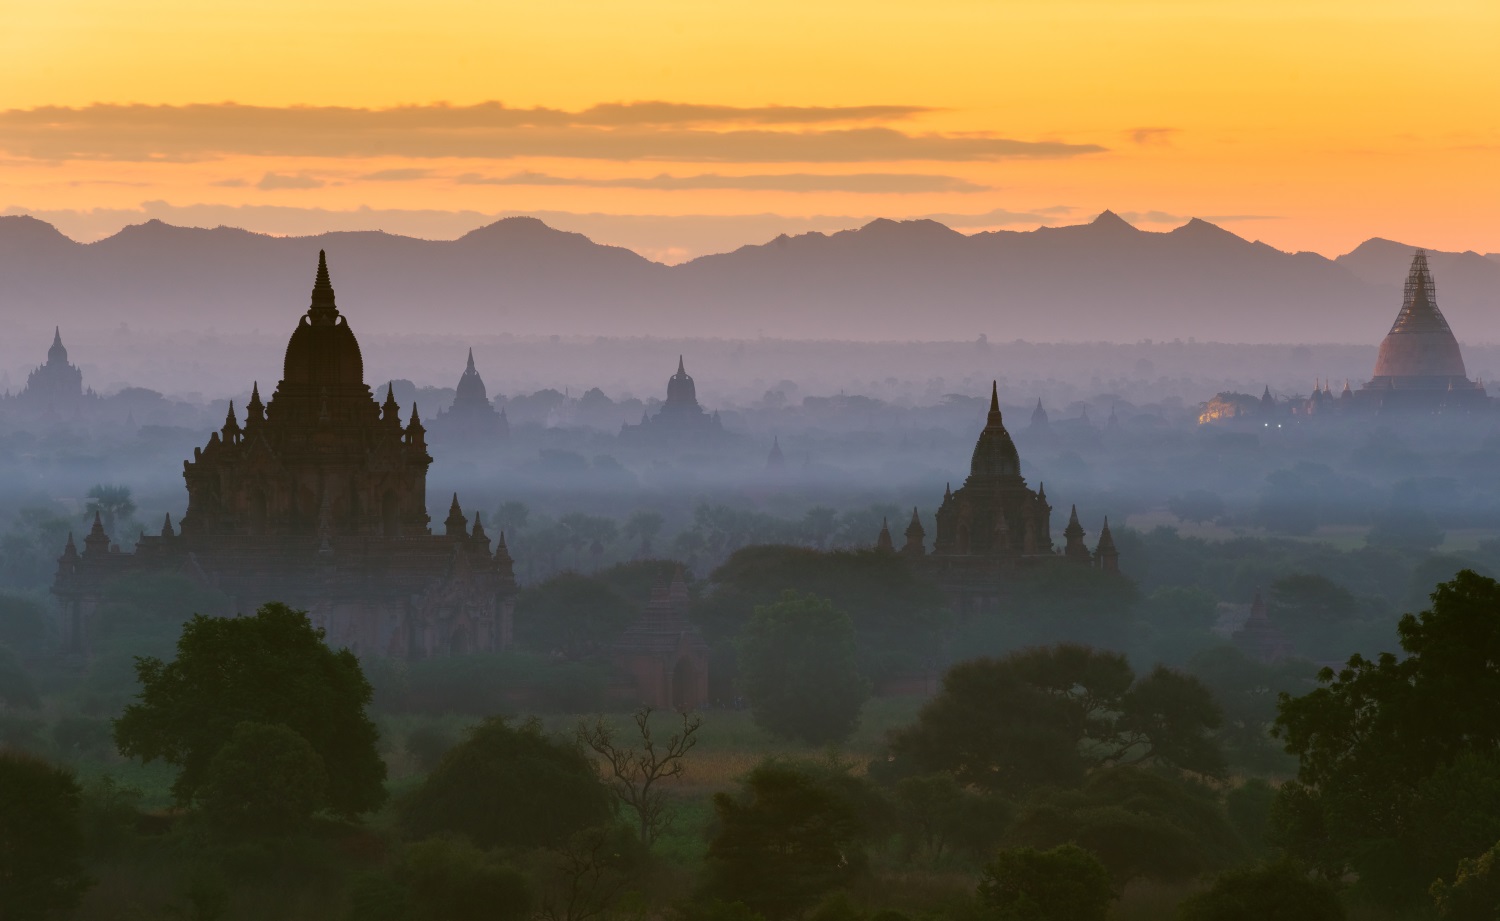 Temples on the Bagan plain